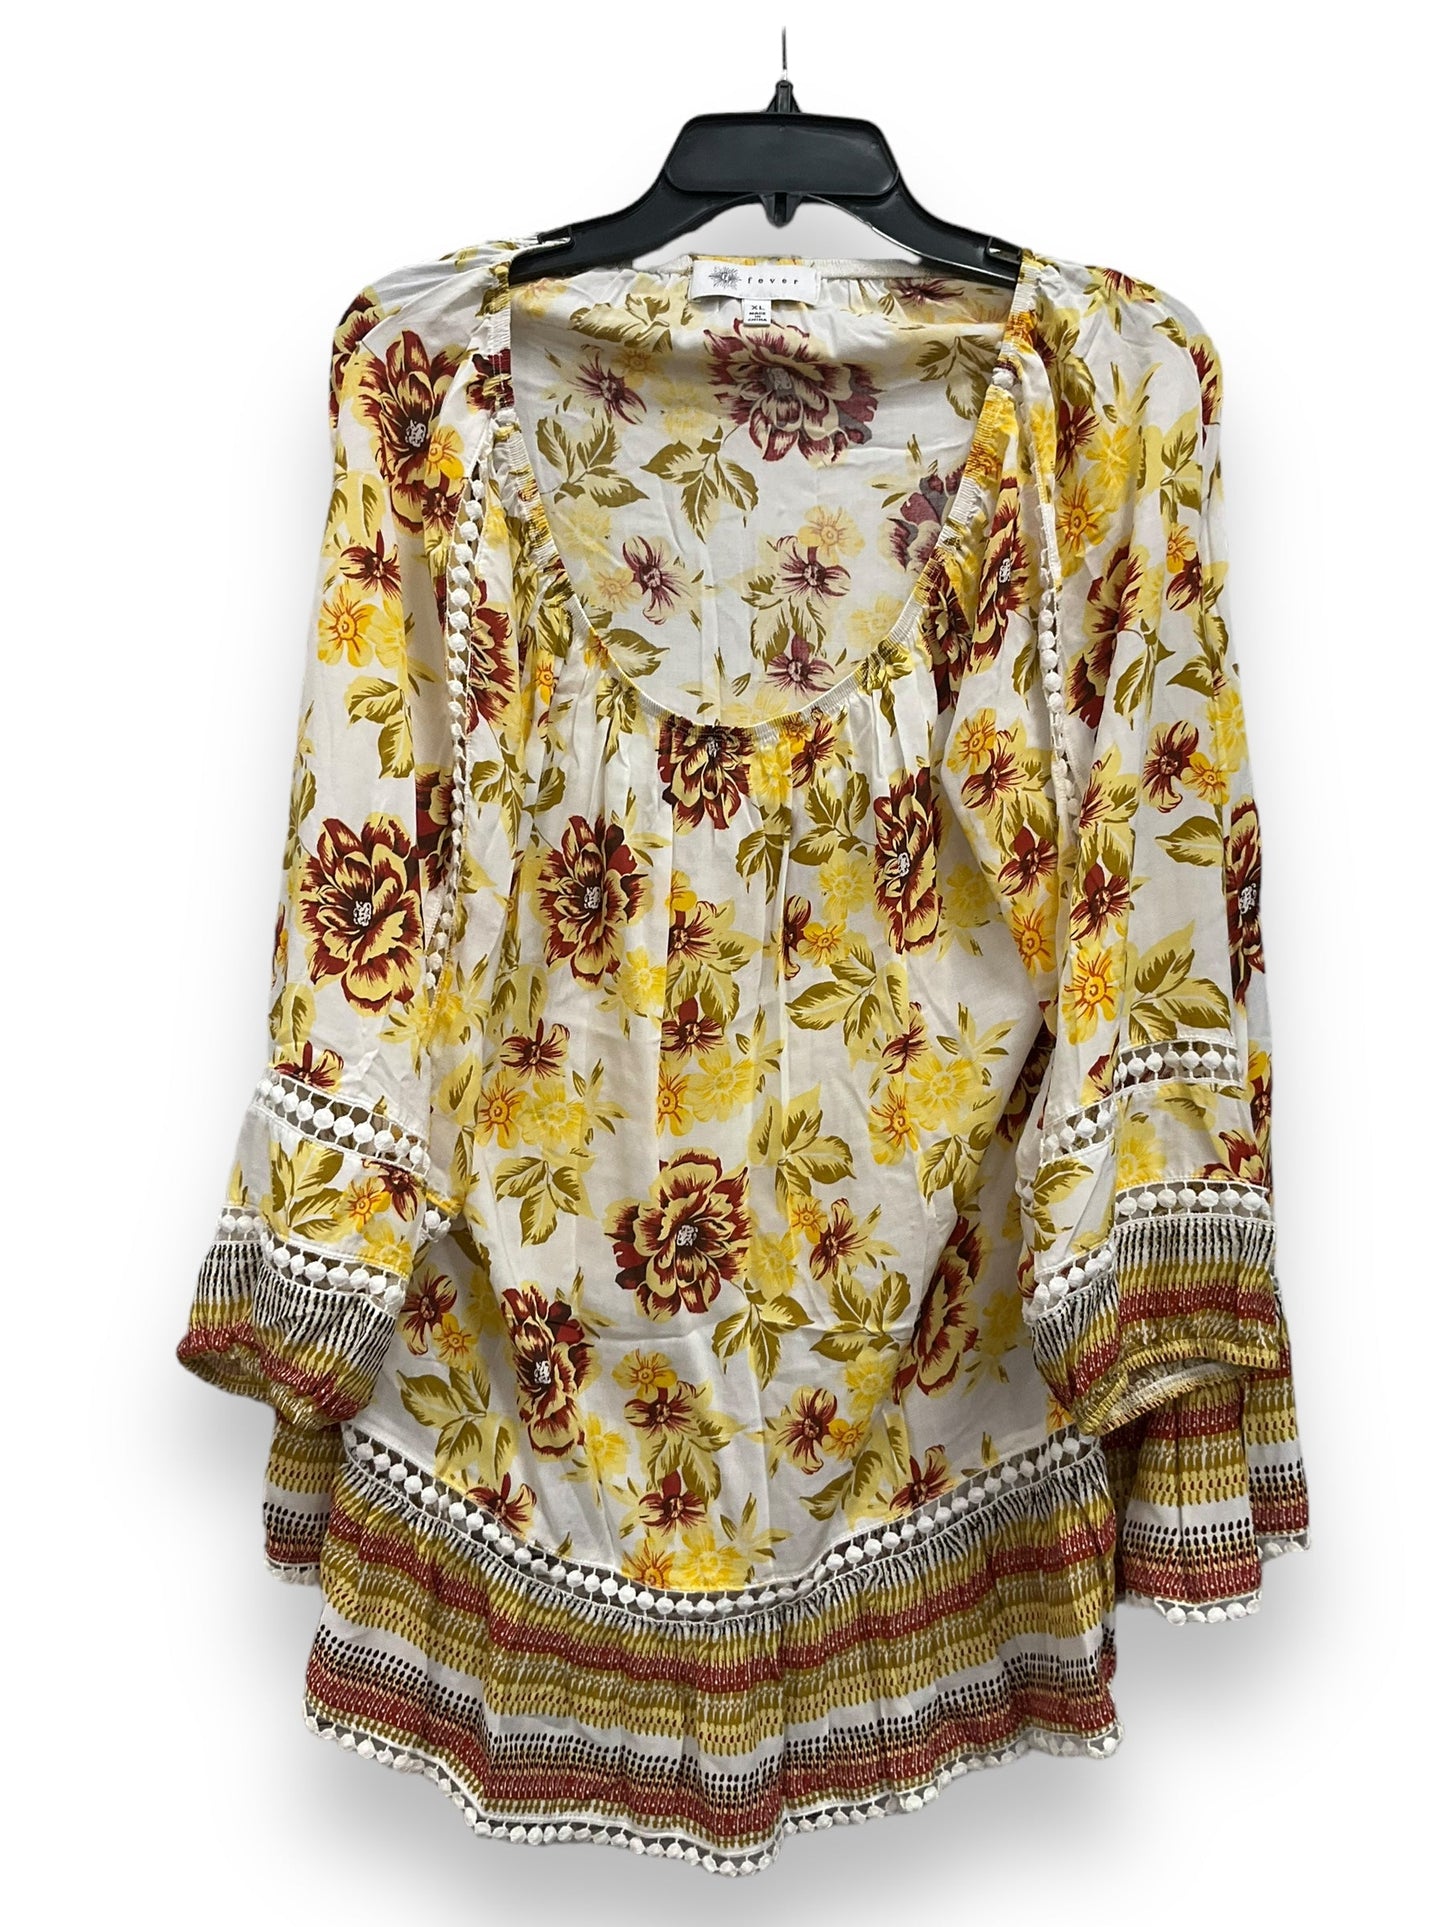 Floral Print Top Long Sleeve Fever, Size Xl